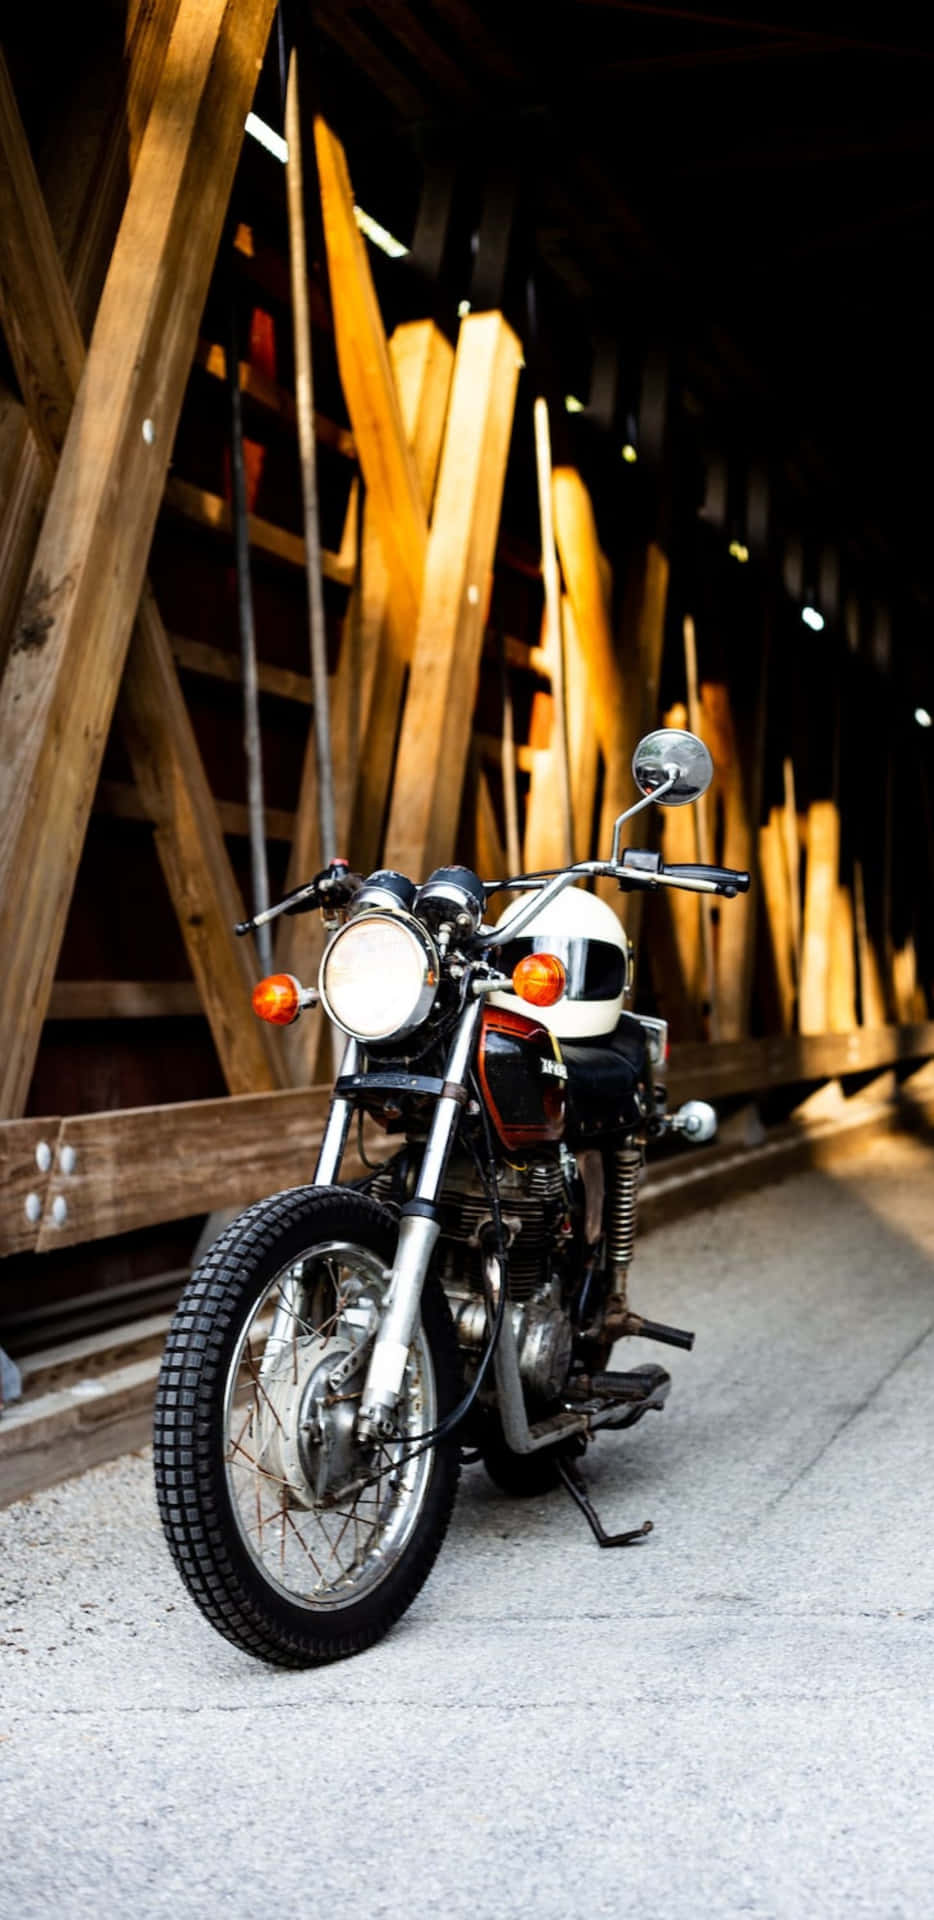 A Motorcycle Parked Under A Wooden Bridge